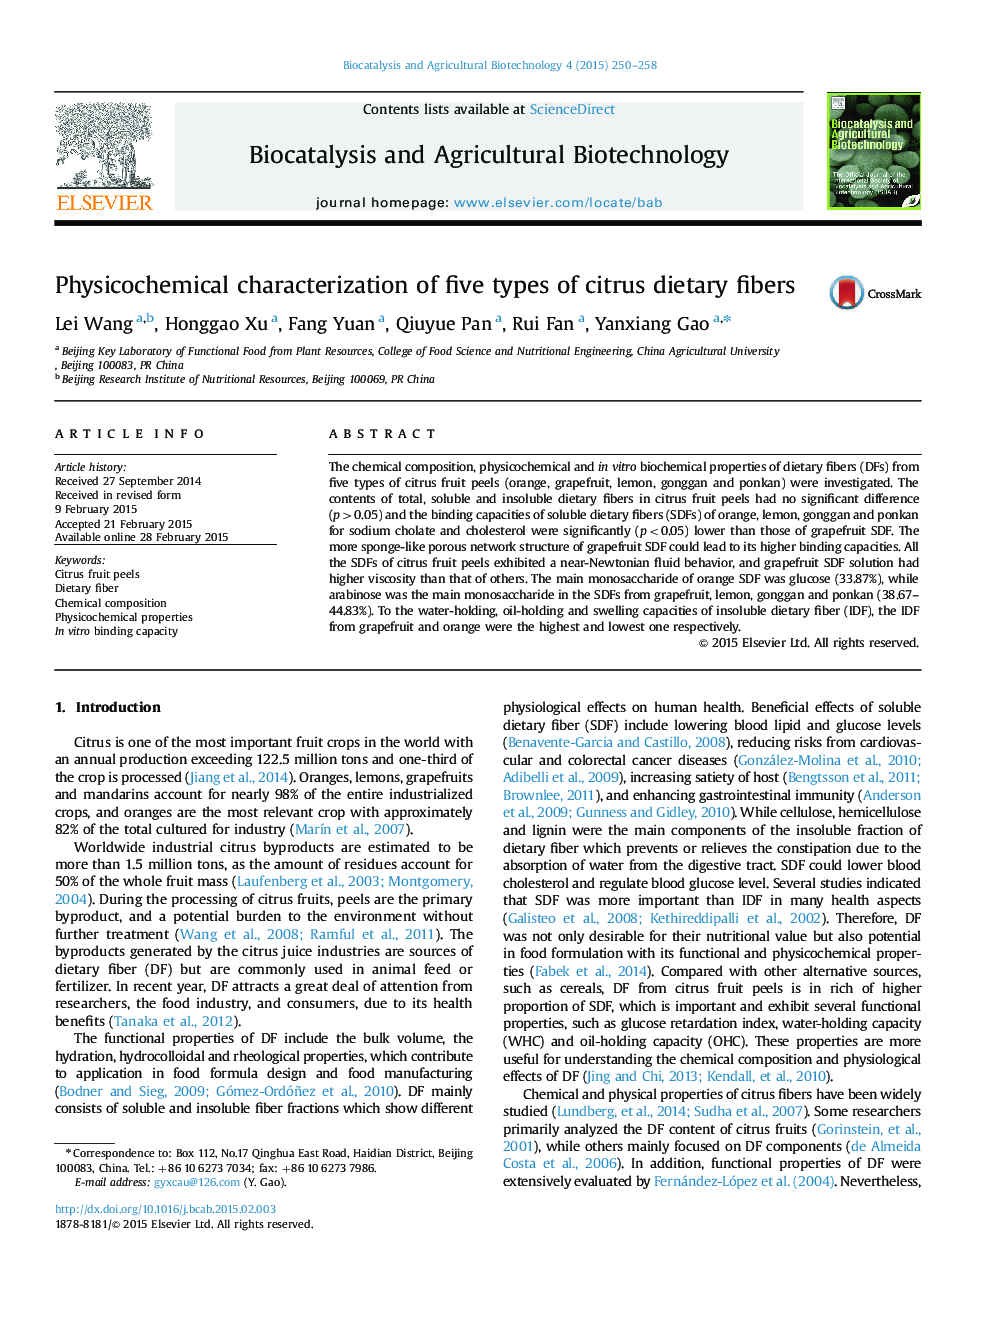 Physicochemical characterization of five types of citrus dietary fibers